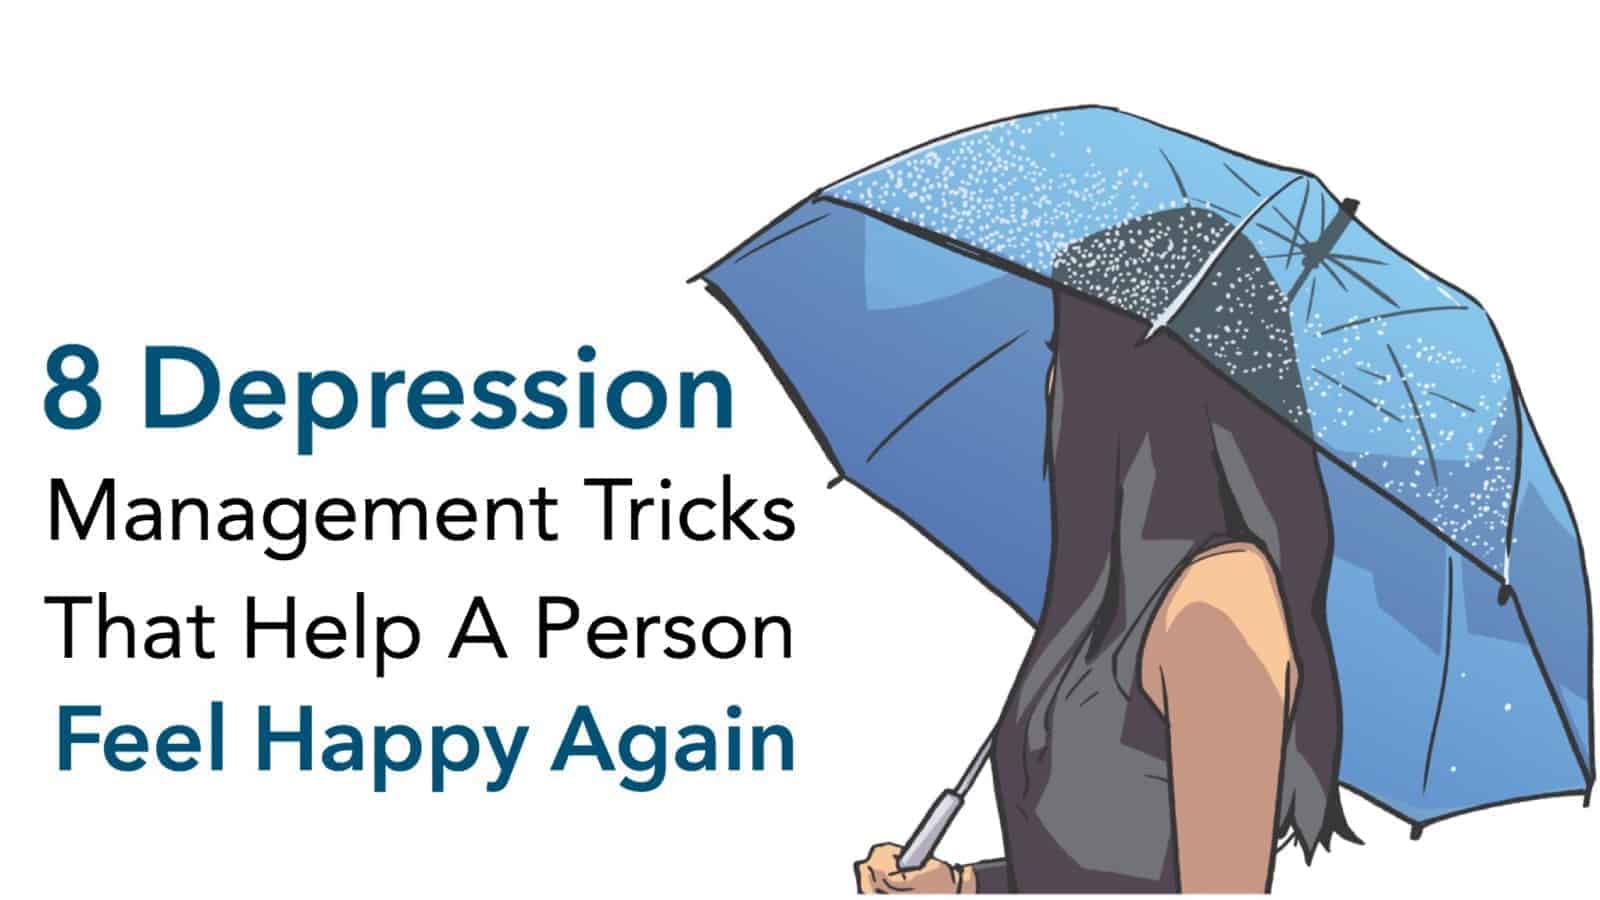 8 Depression Management Tricks That Help A Person Feel Happy Again